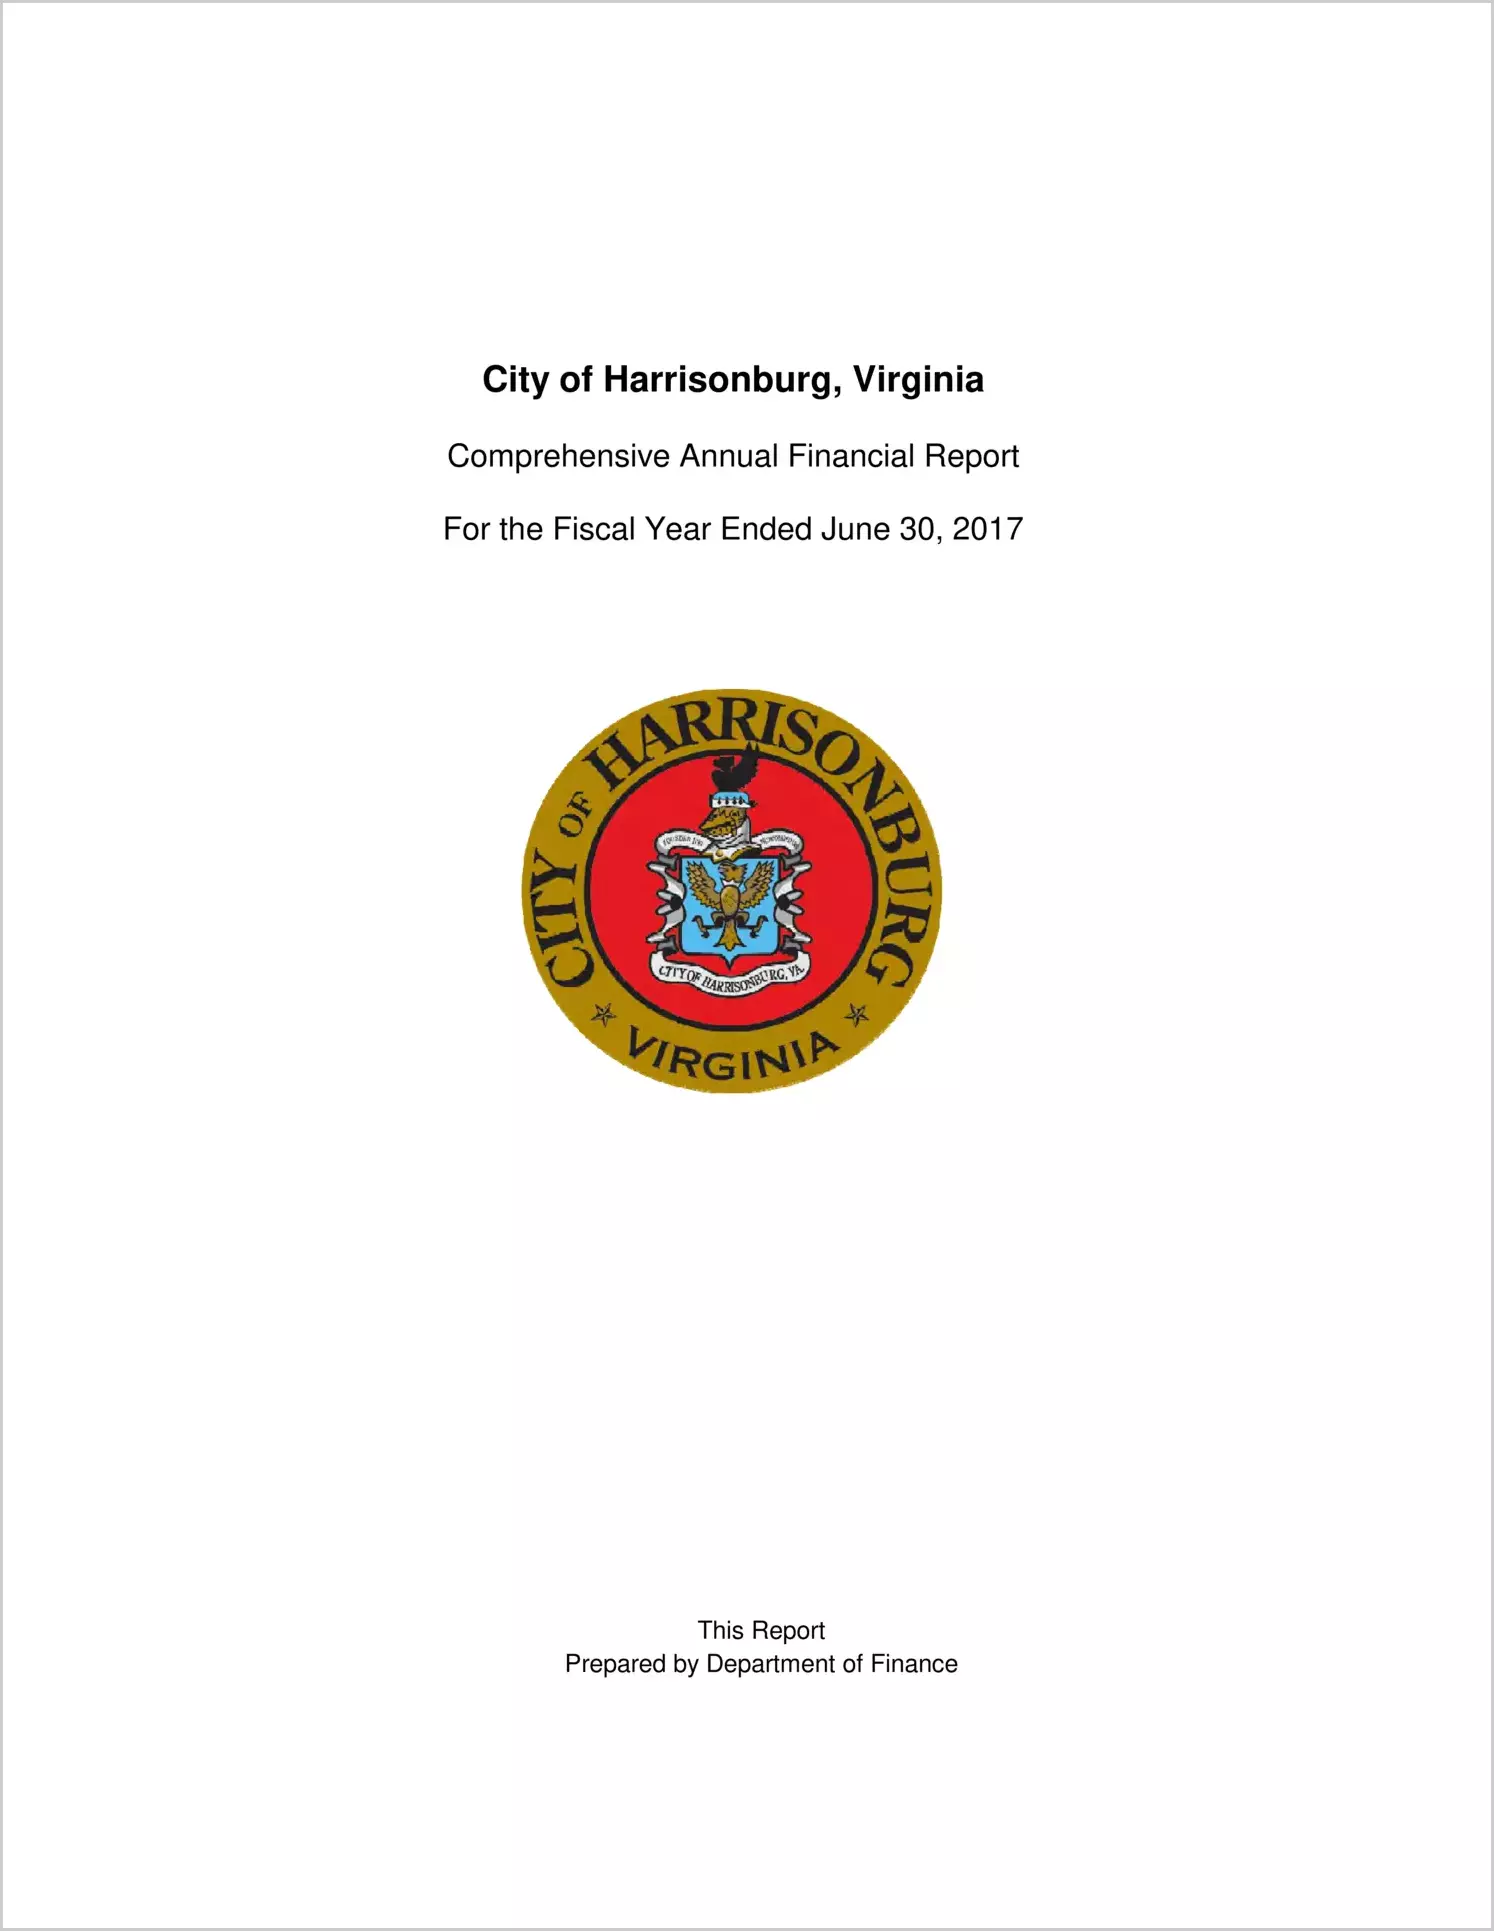 2017 Annual Financial Report for City of Harrisonburg